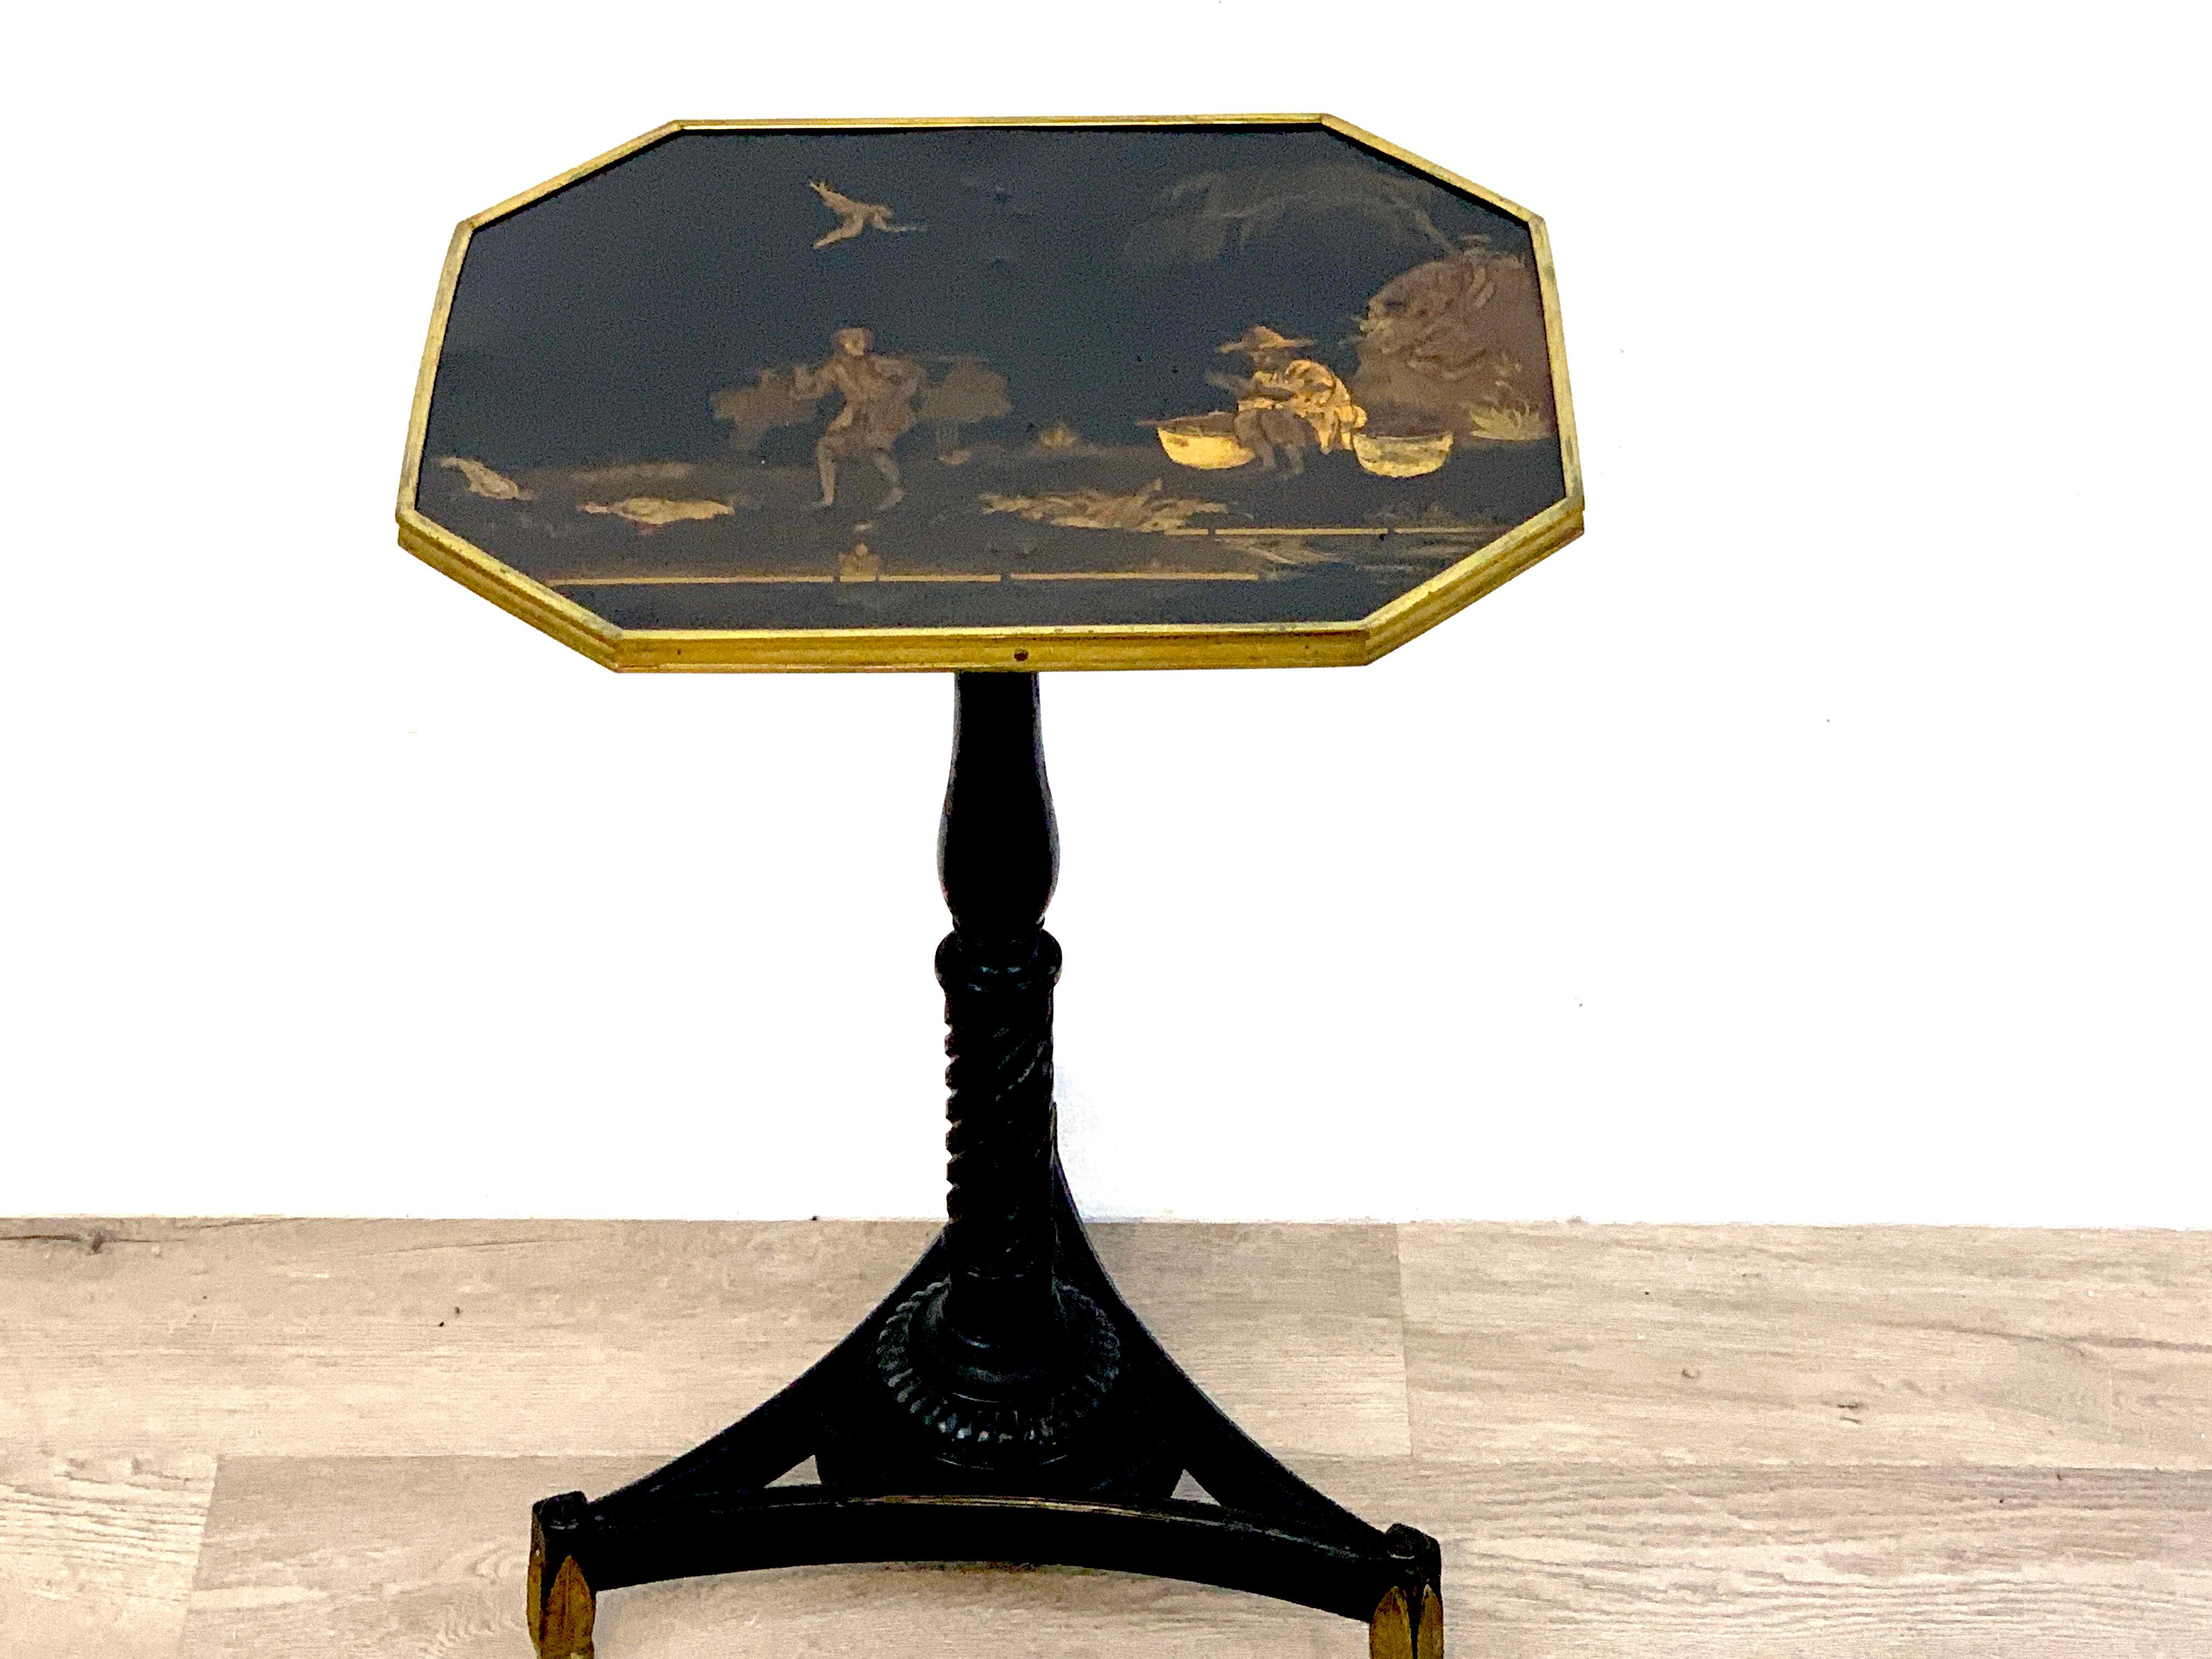 Exquisite Regency Chinoiserie side table, The octagonal finely decorated landscape top, with bronze mounts, raised on a turned column tripartite 13.5